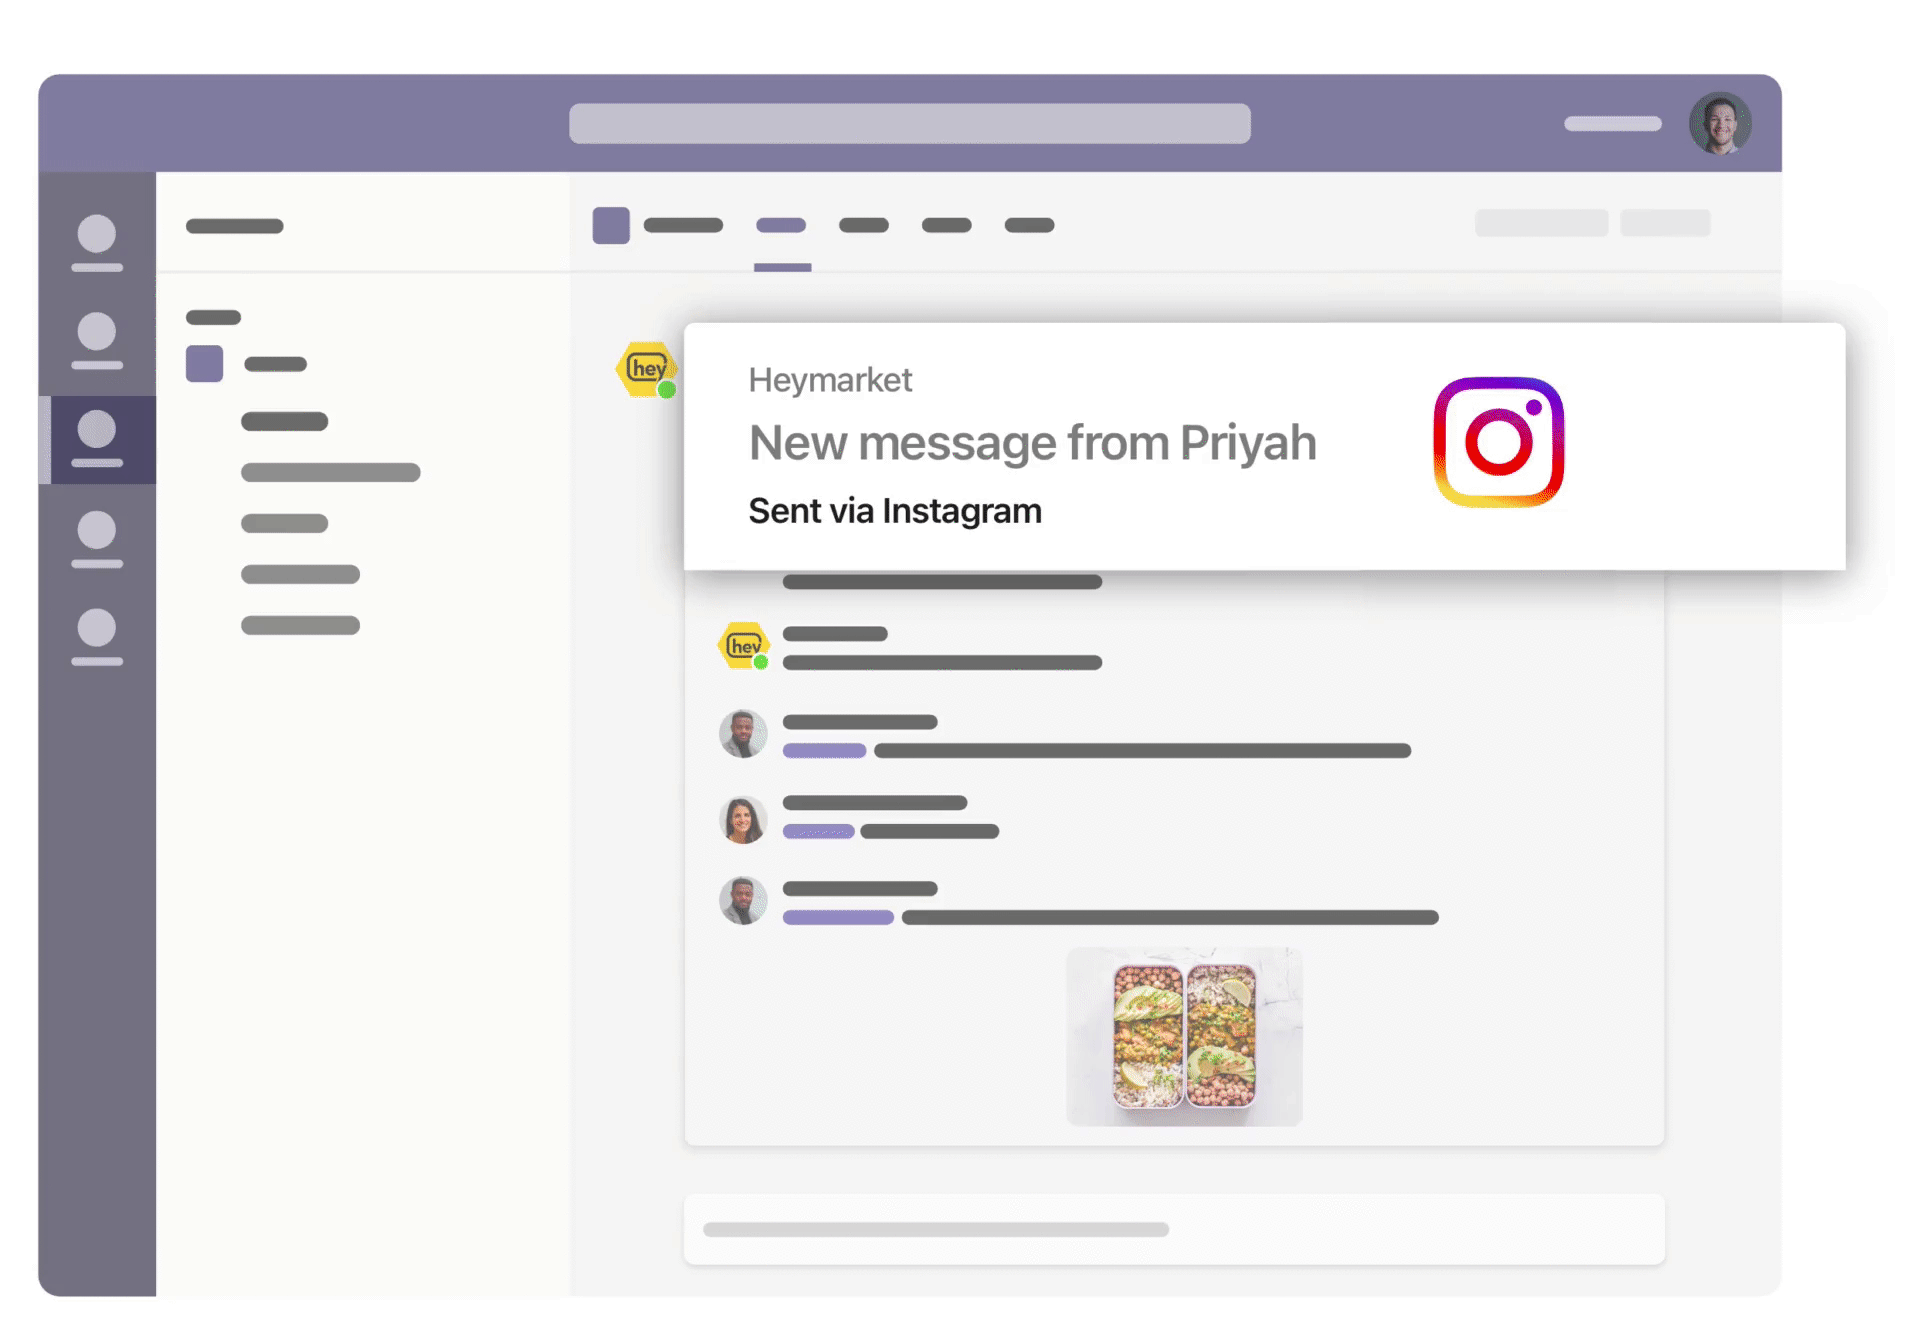 You can use Microsoft teams to send messages to popular messaging channels